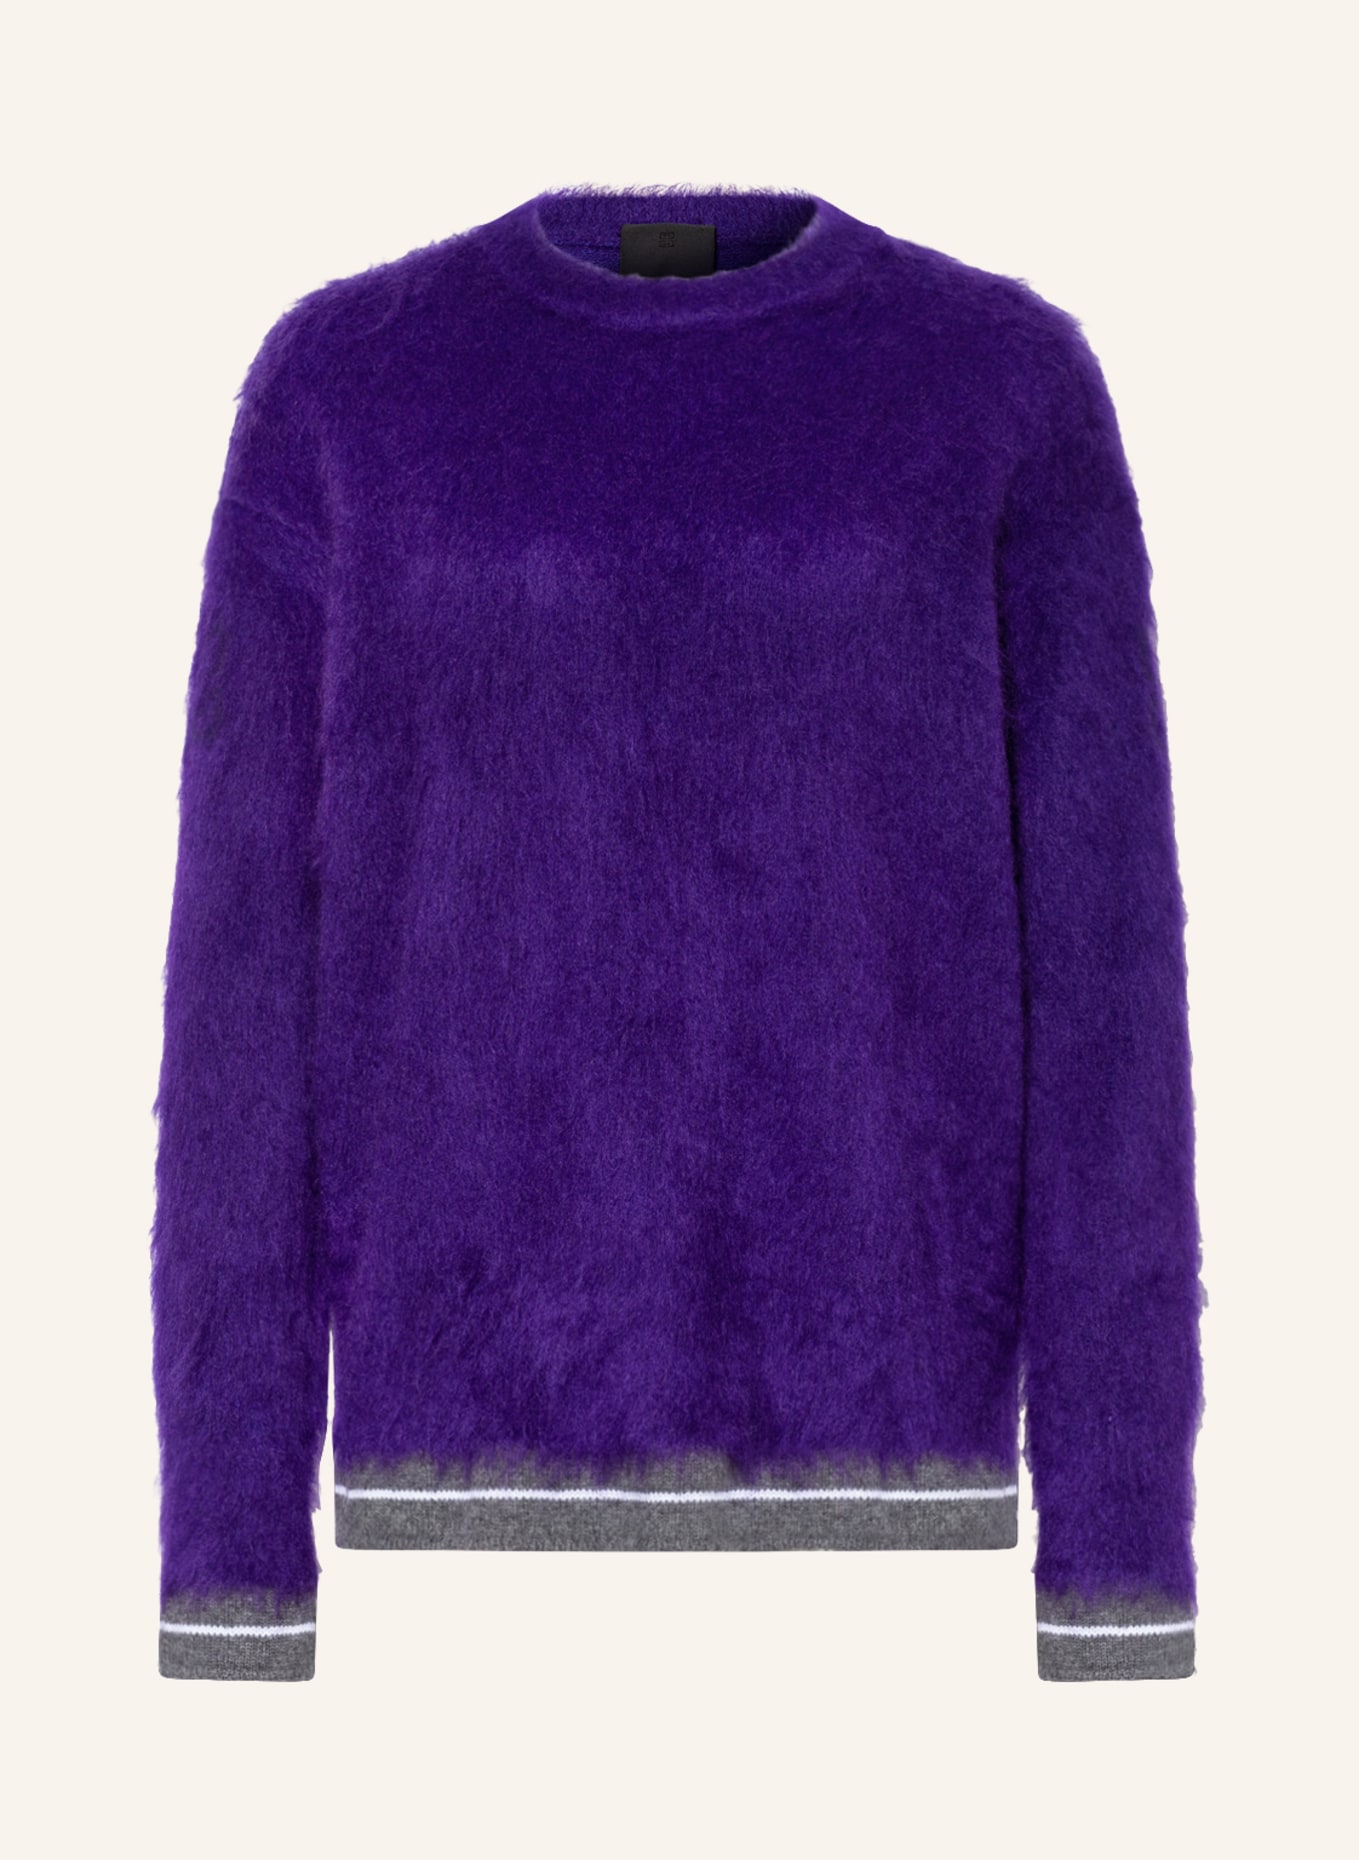 GIVENCHY Oversized-Pullover mit Mohair , Farbe: LILA (Bild 1)